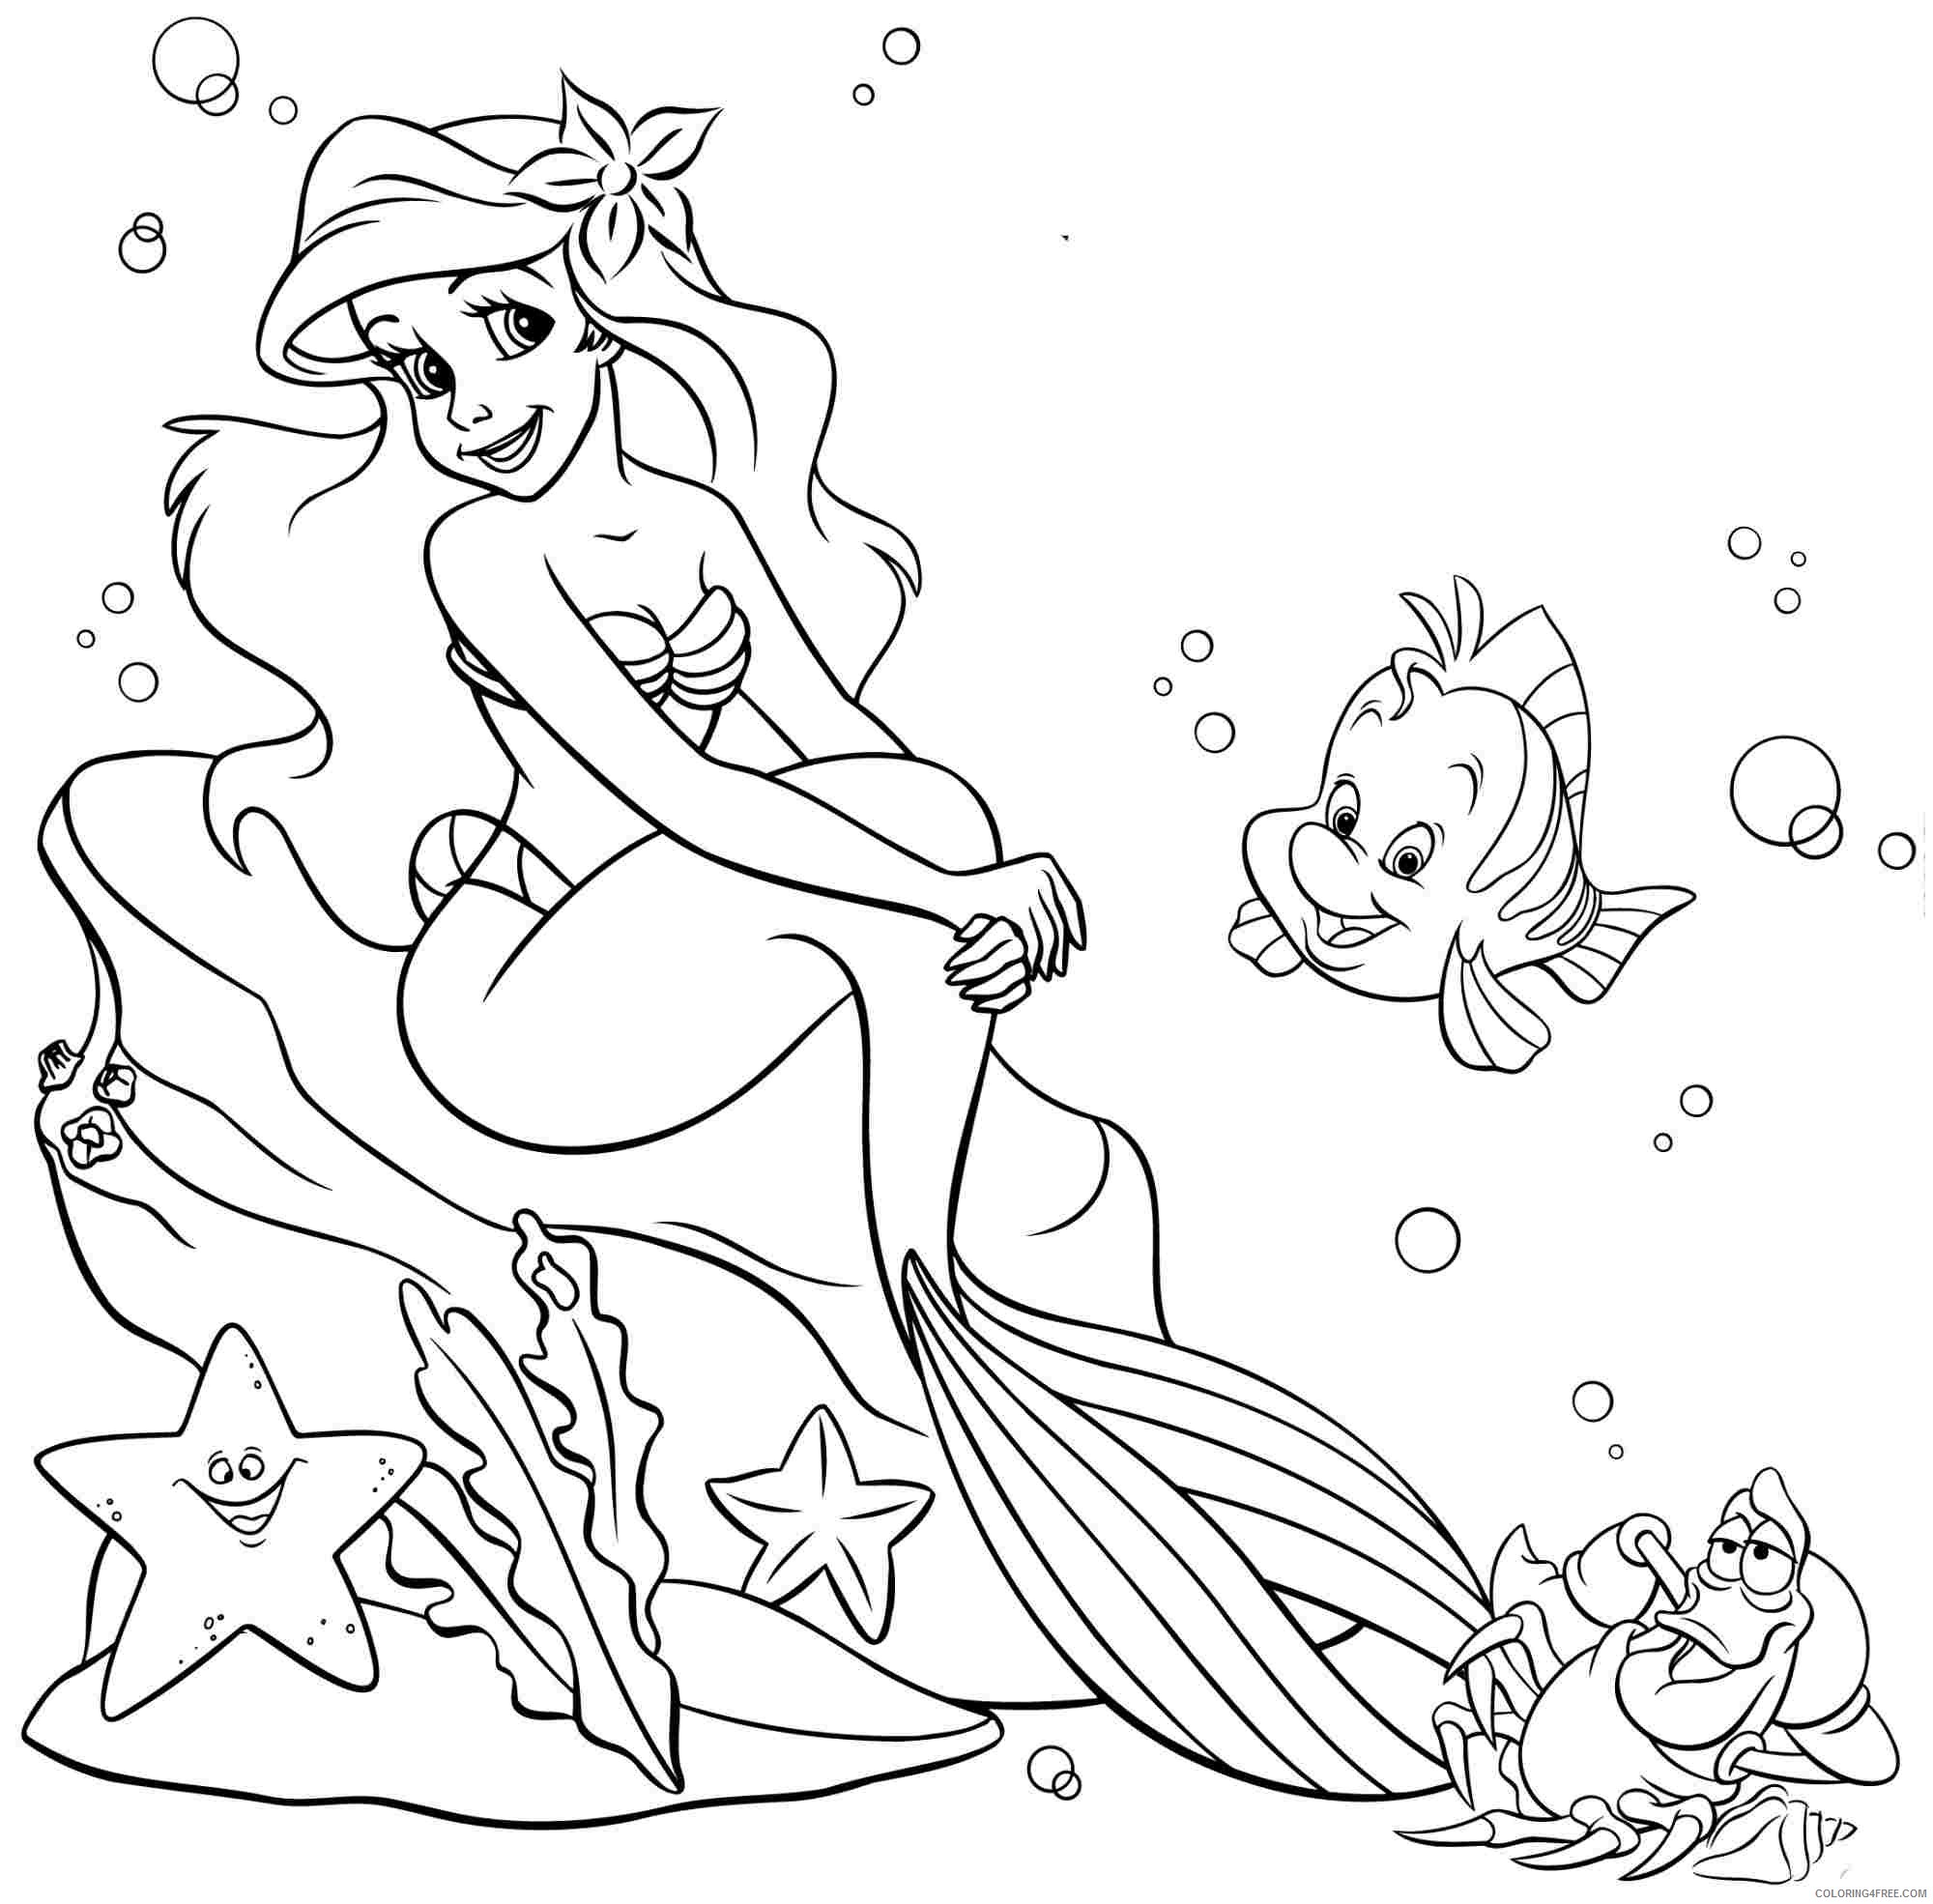 mermaid coloring pages free to print Coloring4free